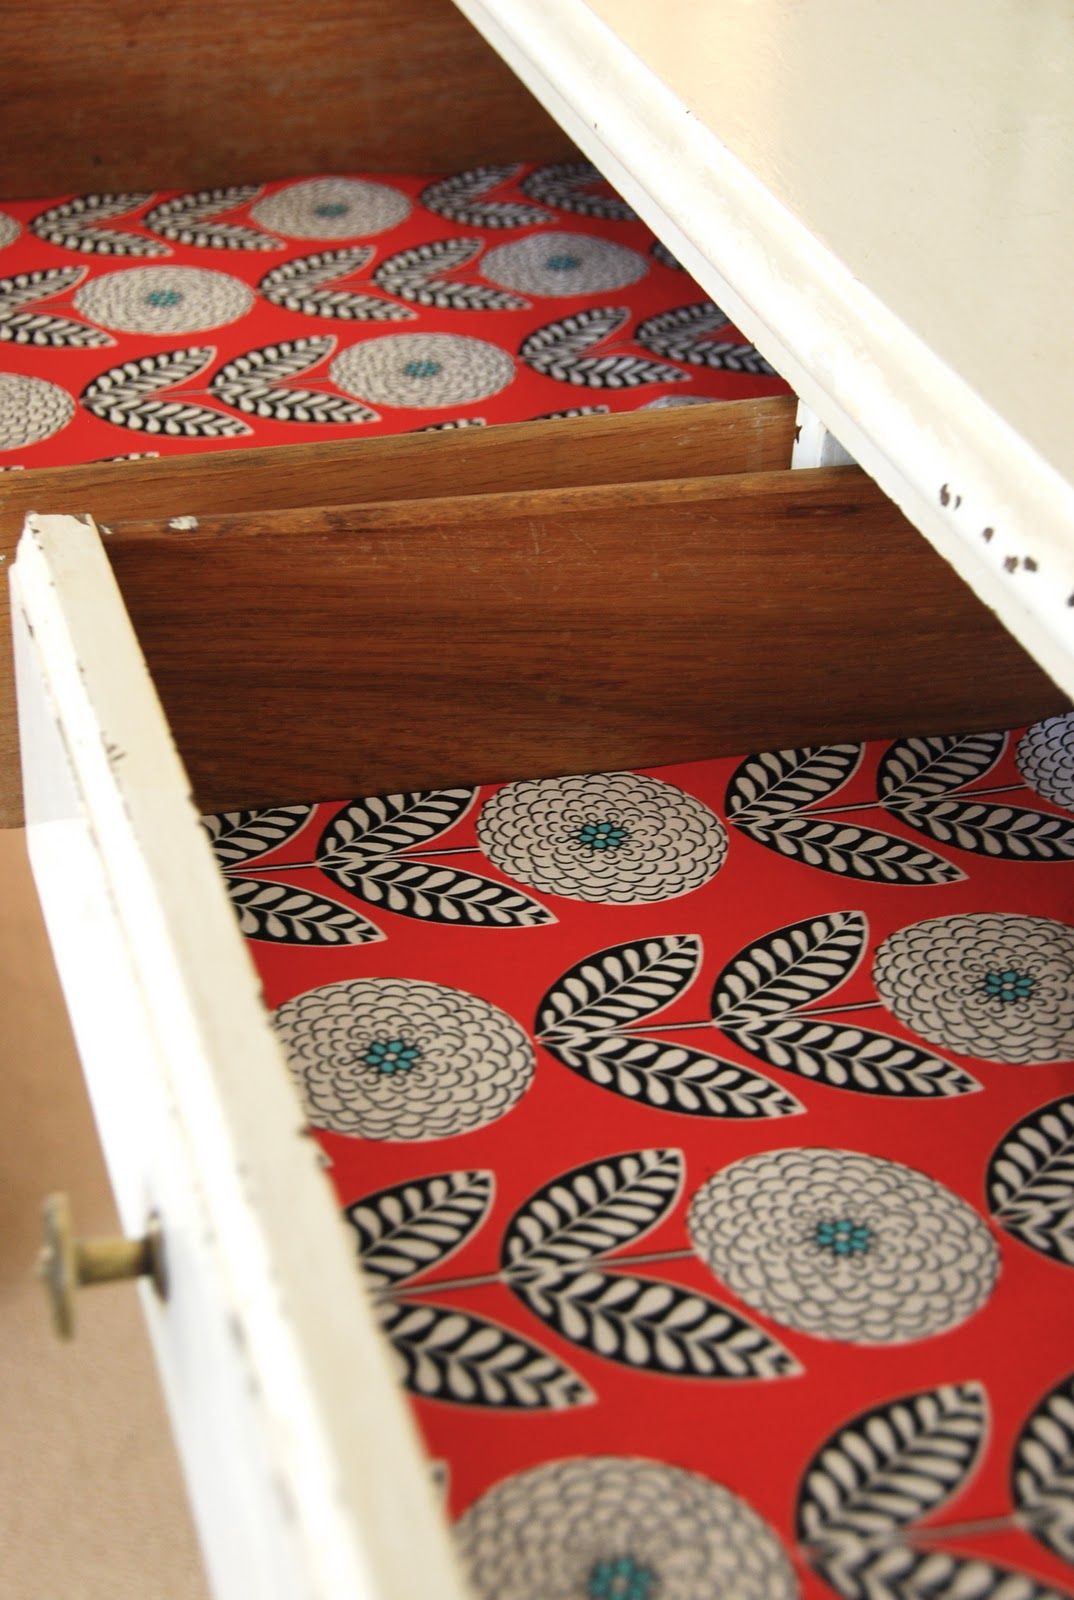 A drawer made from leftover wallpaper with a red and black pattern.